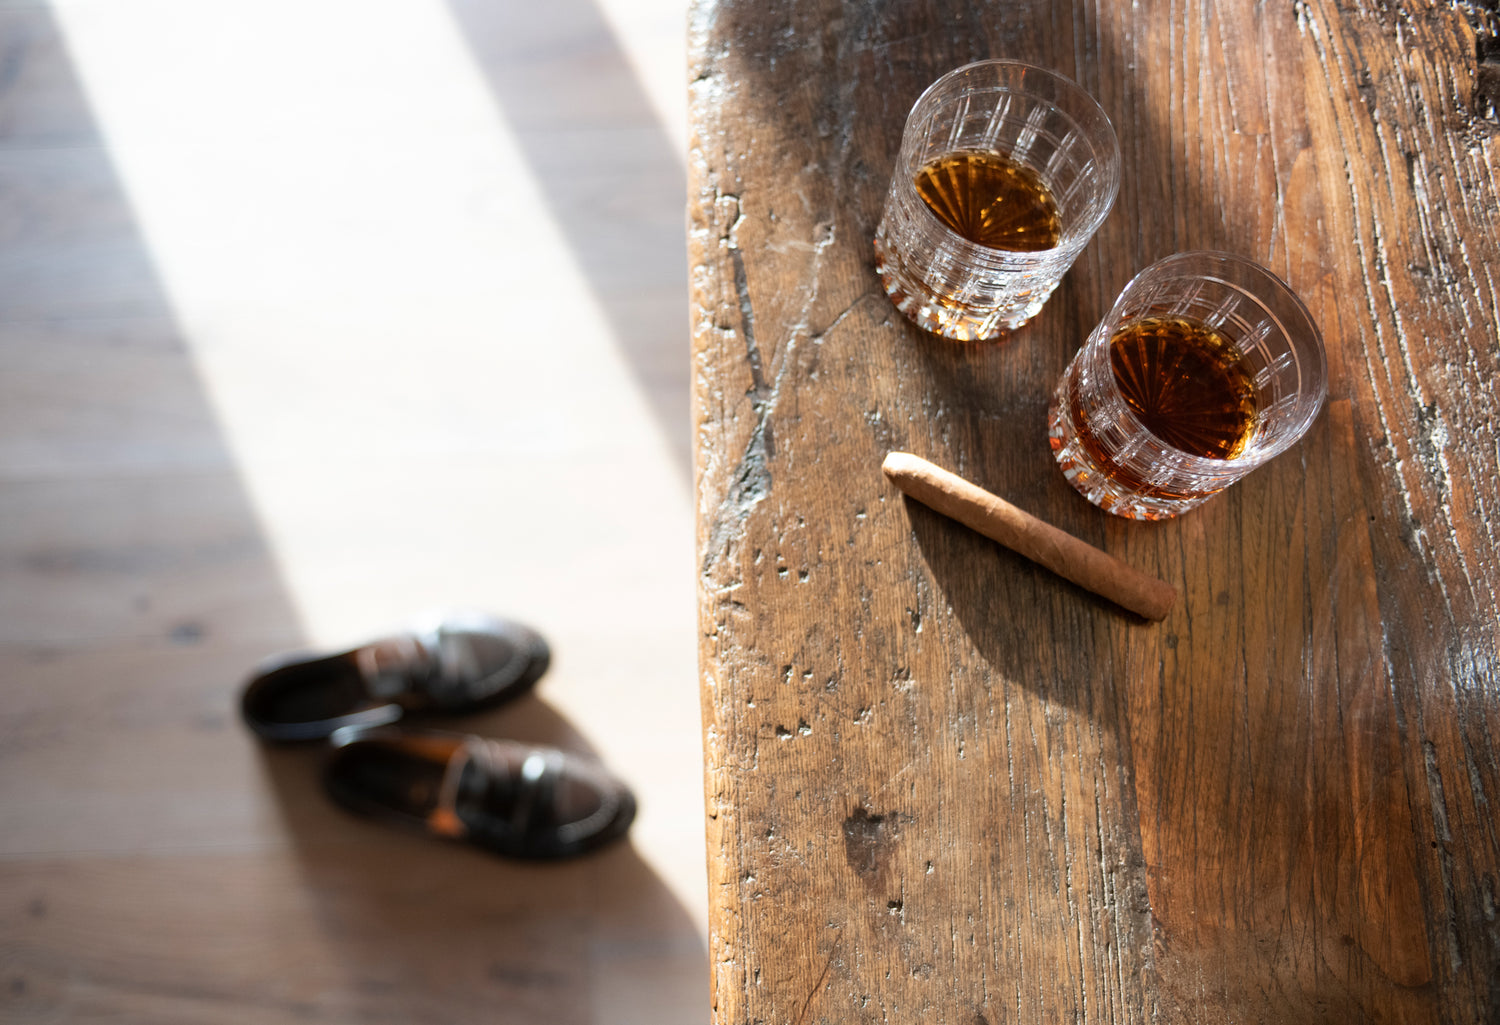 living-italian-dolce-far-niente-two-whiskey-glasses-cigar-table-shoes